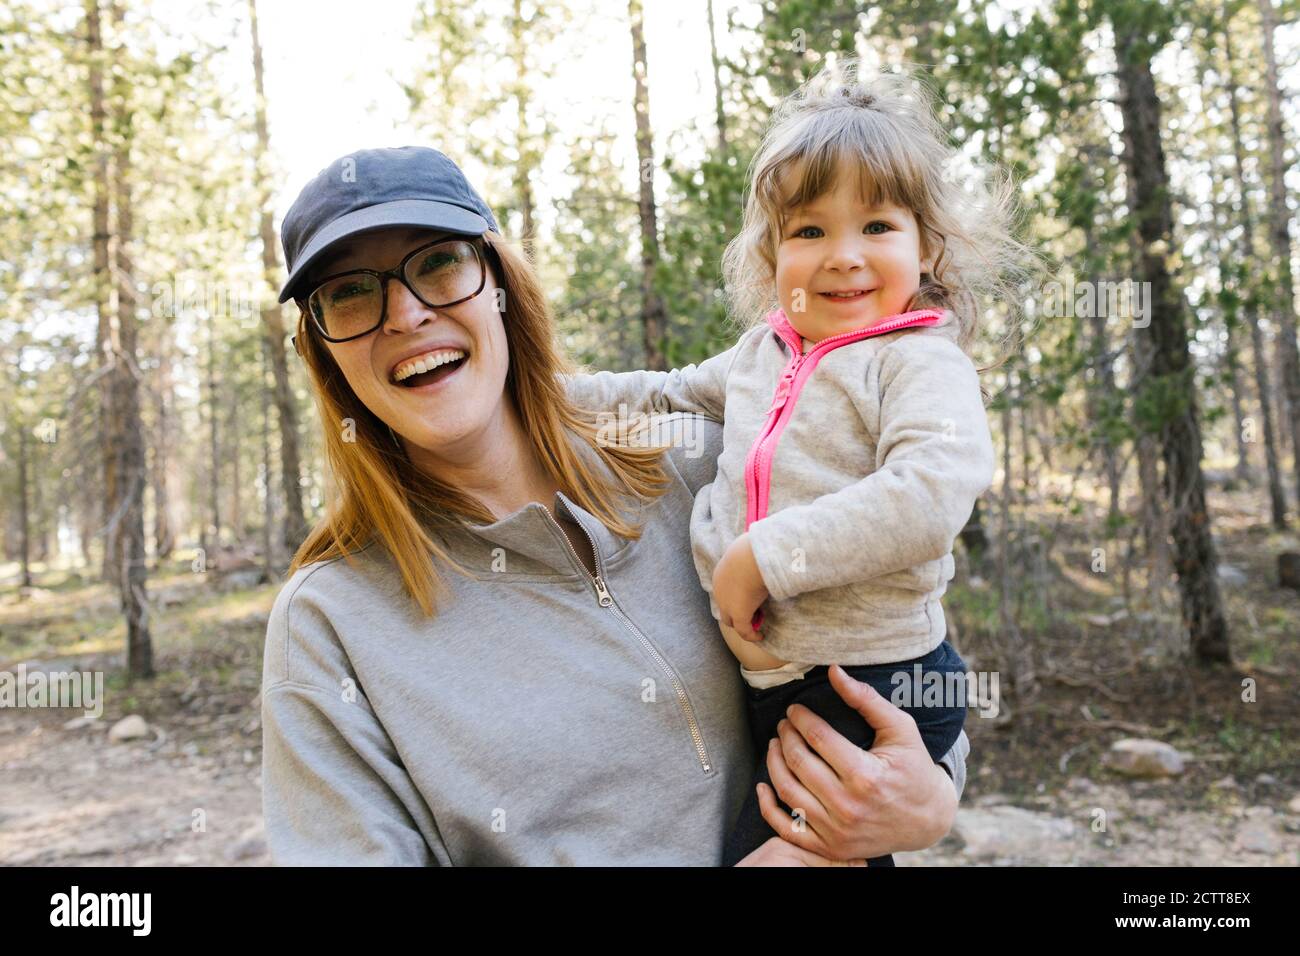 Portrait of happy mother with little daughter (2-3) in Uinta-Wasatch-Cache National Forest Stock Photo